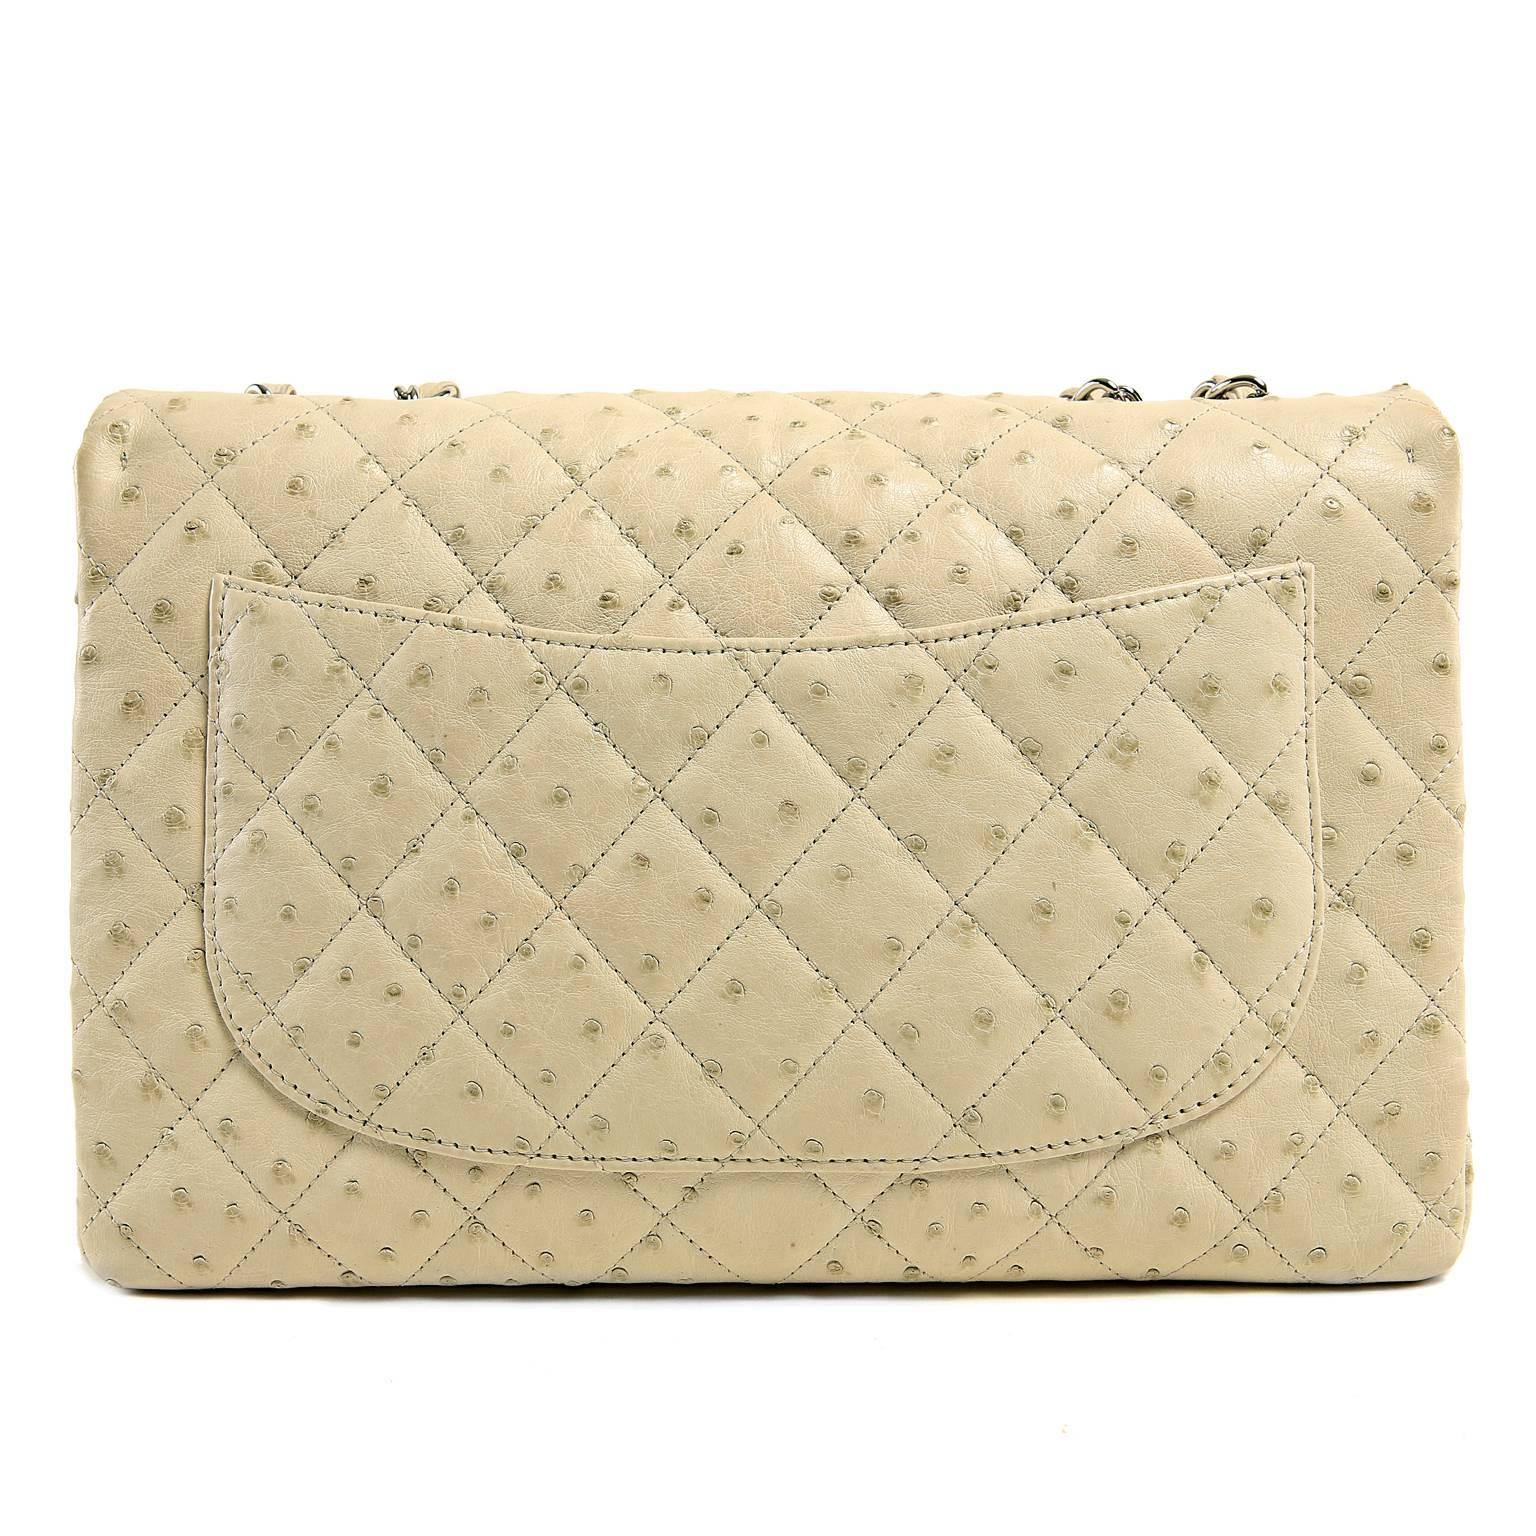 Chanel Ivory Ostrich Maxi- PRISTINE;  Extremely rare, ostrich is a highly collectible exotic. 
 
Ostrich skin is considered one of the most durable commercial leathers available.  It is easily recognized by the dot composition from the quill of